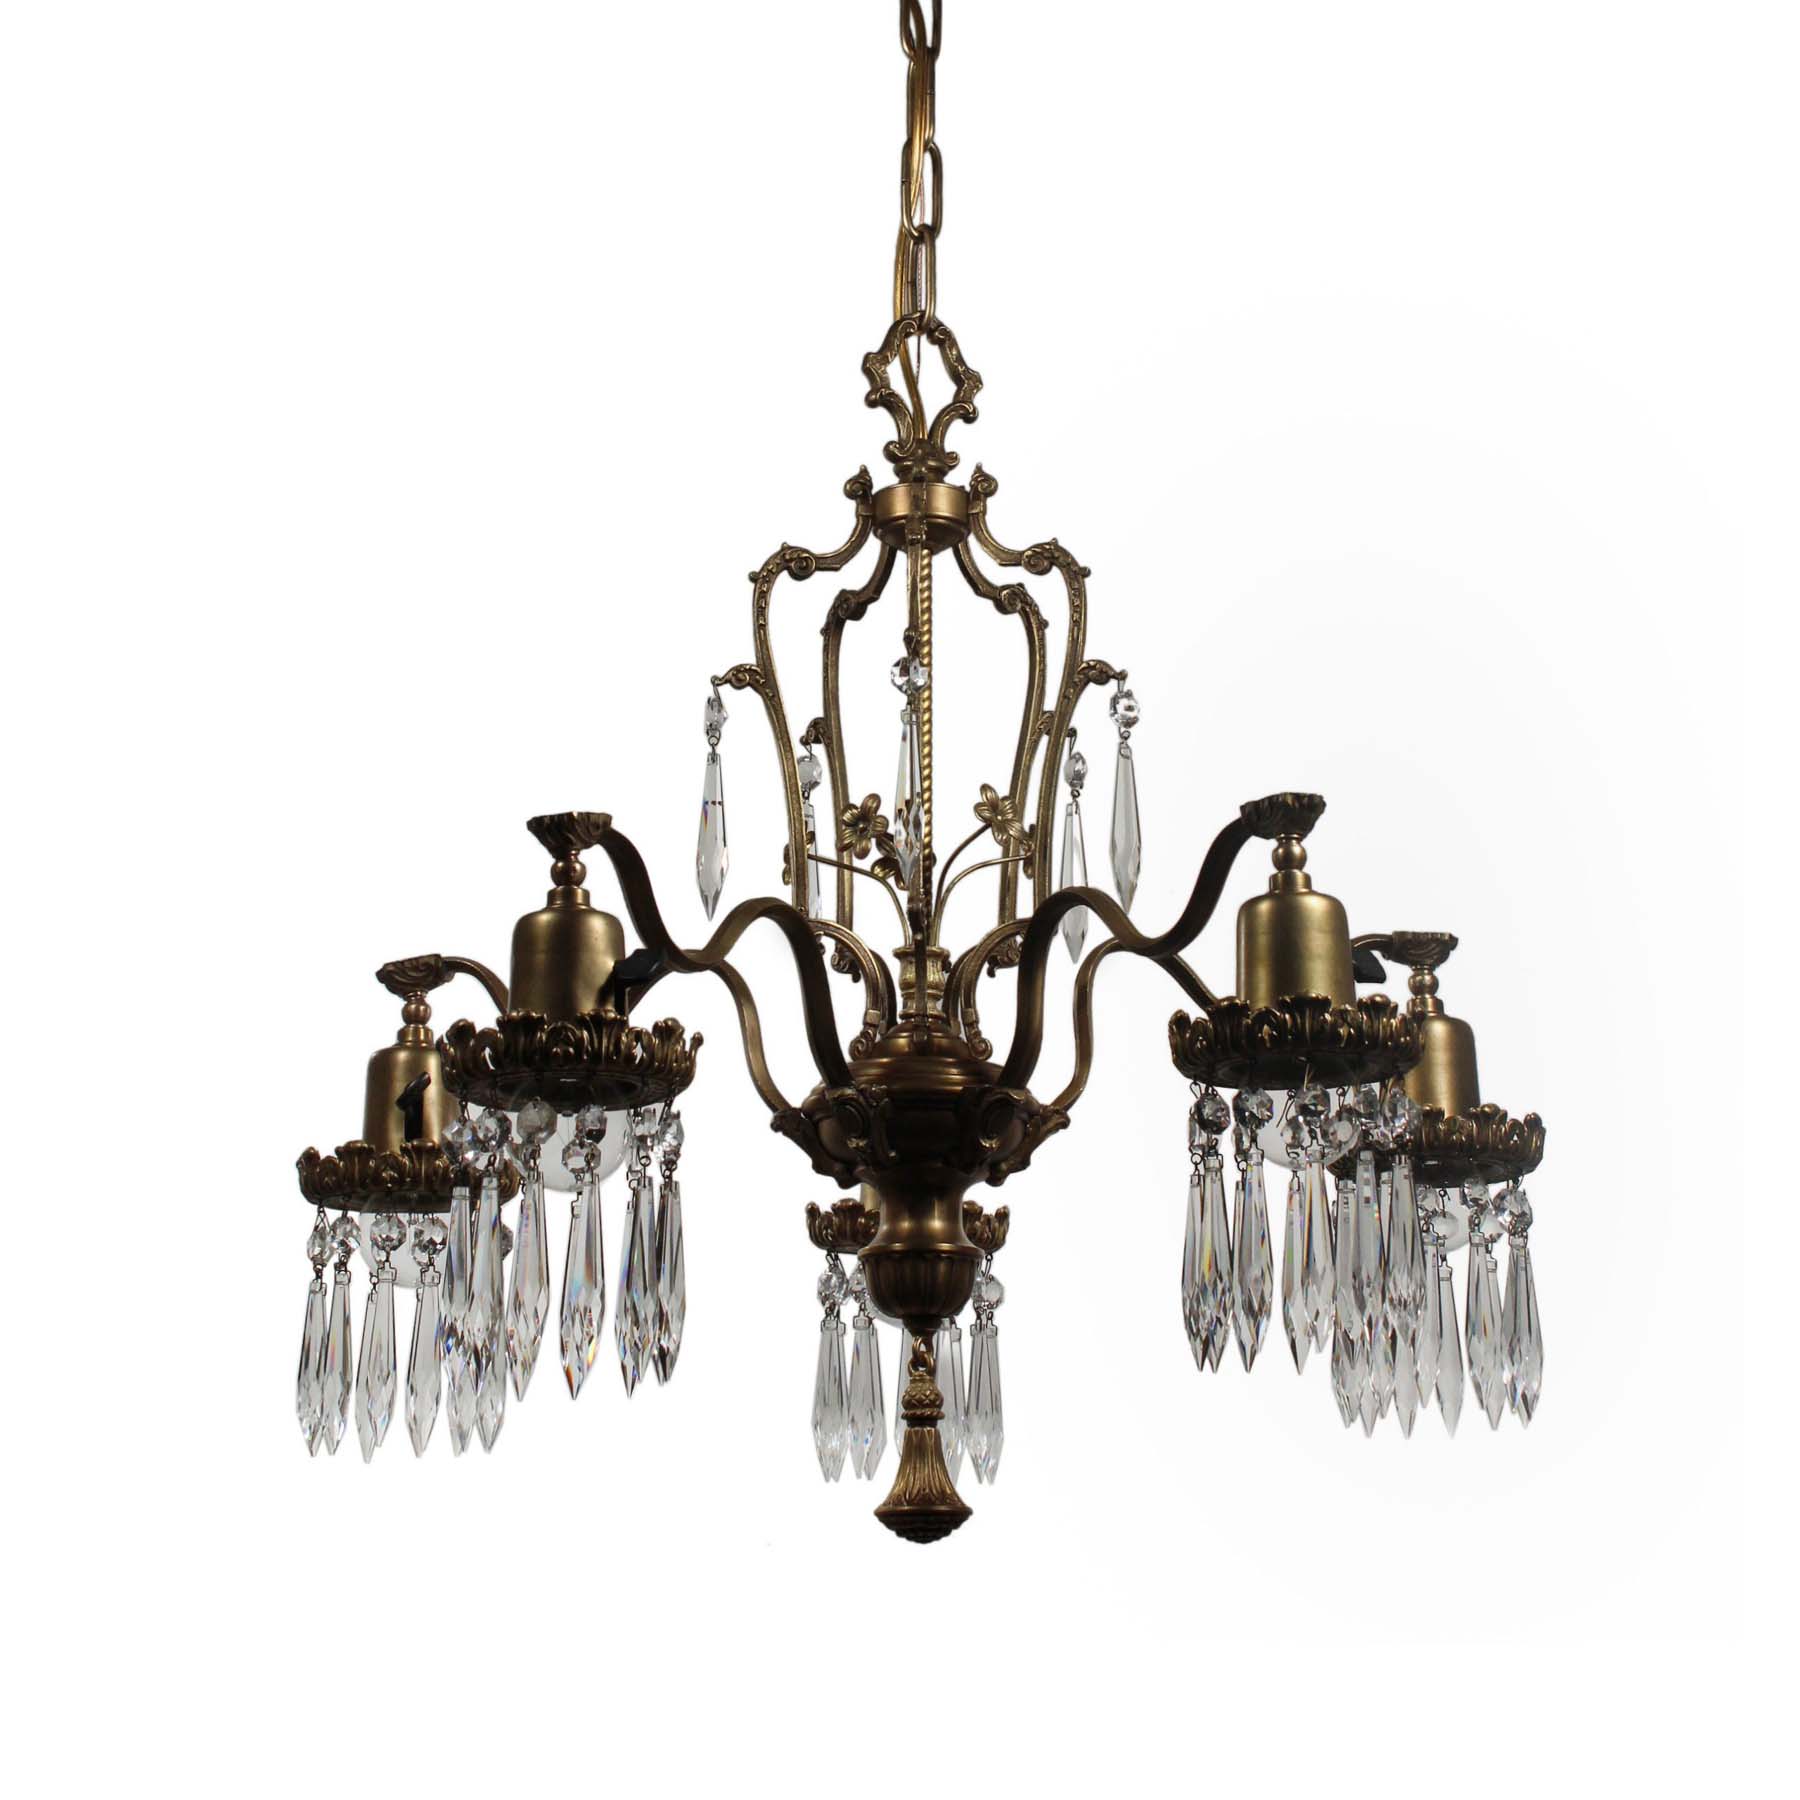 SOLD Neoclassical Chandelier with Prisms, Antique Lighting-67442